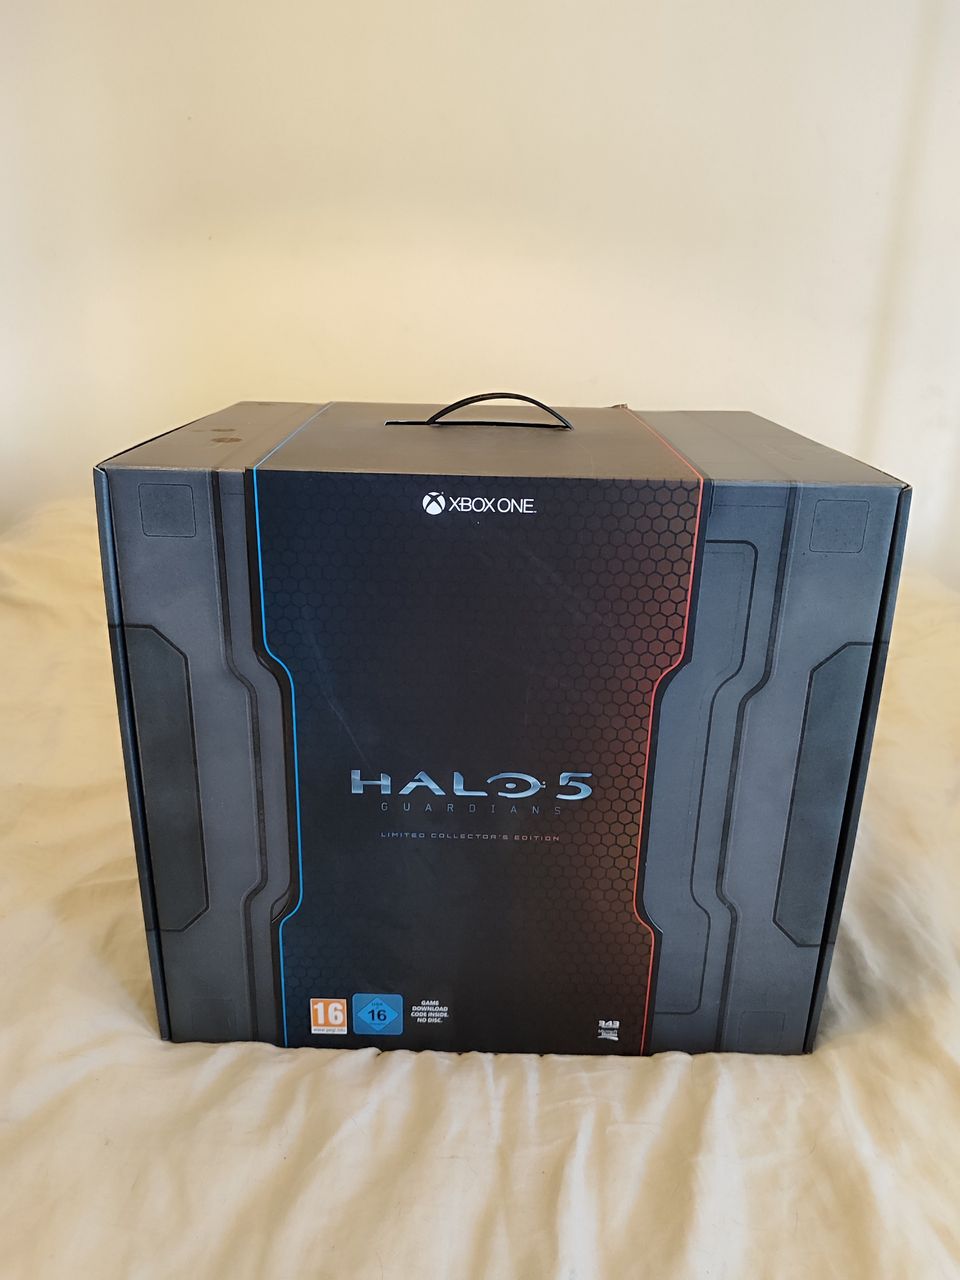 Halo 5 Guardians Limited Collector's Editon